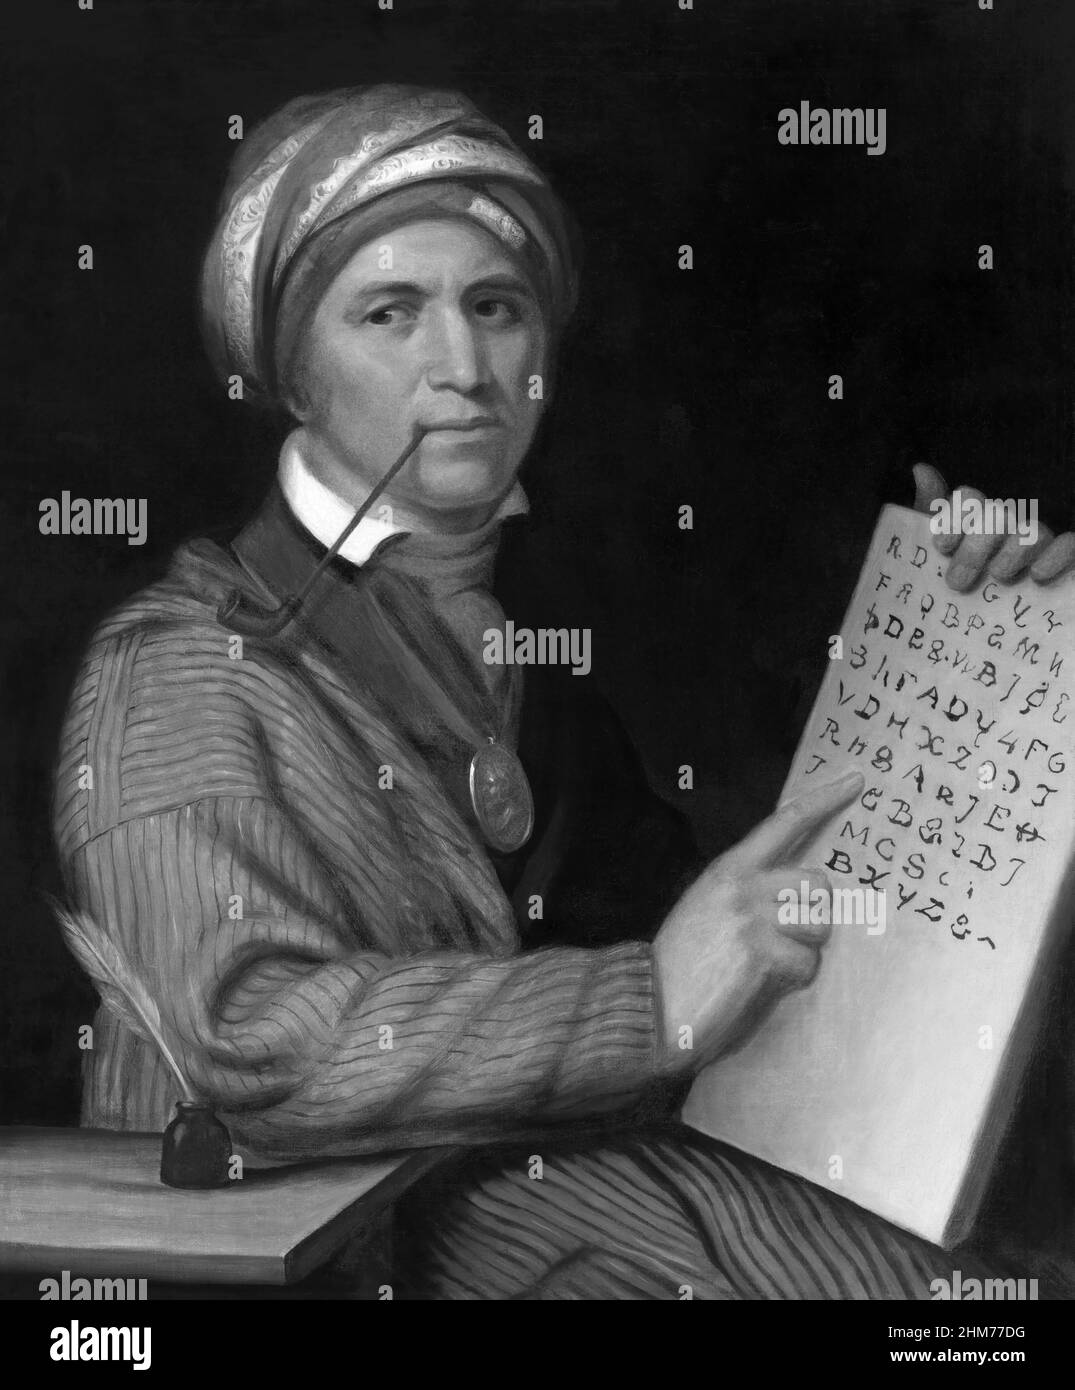 Sequoyah (c1770–1843), son of a Cherokee woman and a fur trader from Virginia, was a warrior, hunter, and silversmith who for twelve years worked to devise a method of writing for the Cherokee language. (From a painted portrait by Henry Inman, c1830, after an earlier portrait by Charles Bird King which was destroyed in the Smithsonian Castle fire of 1865.) Stock Photo